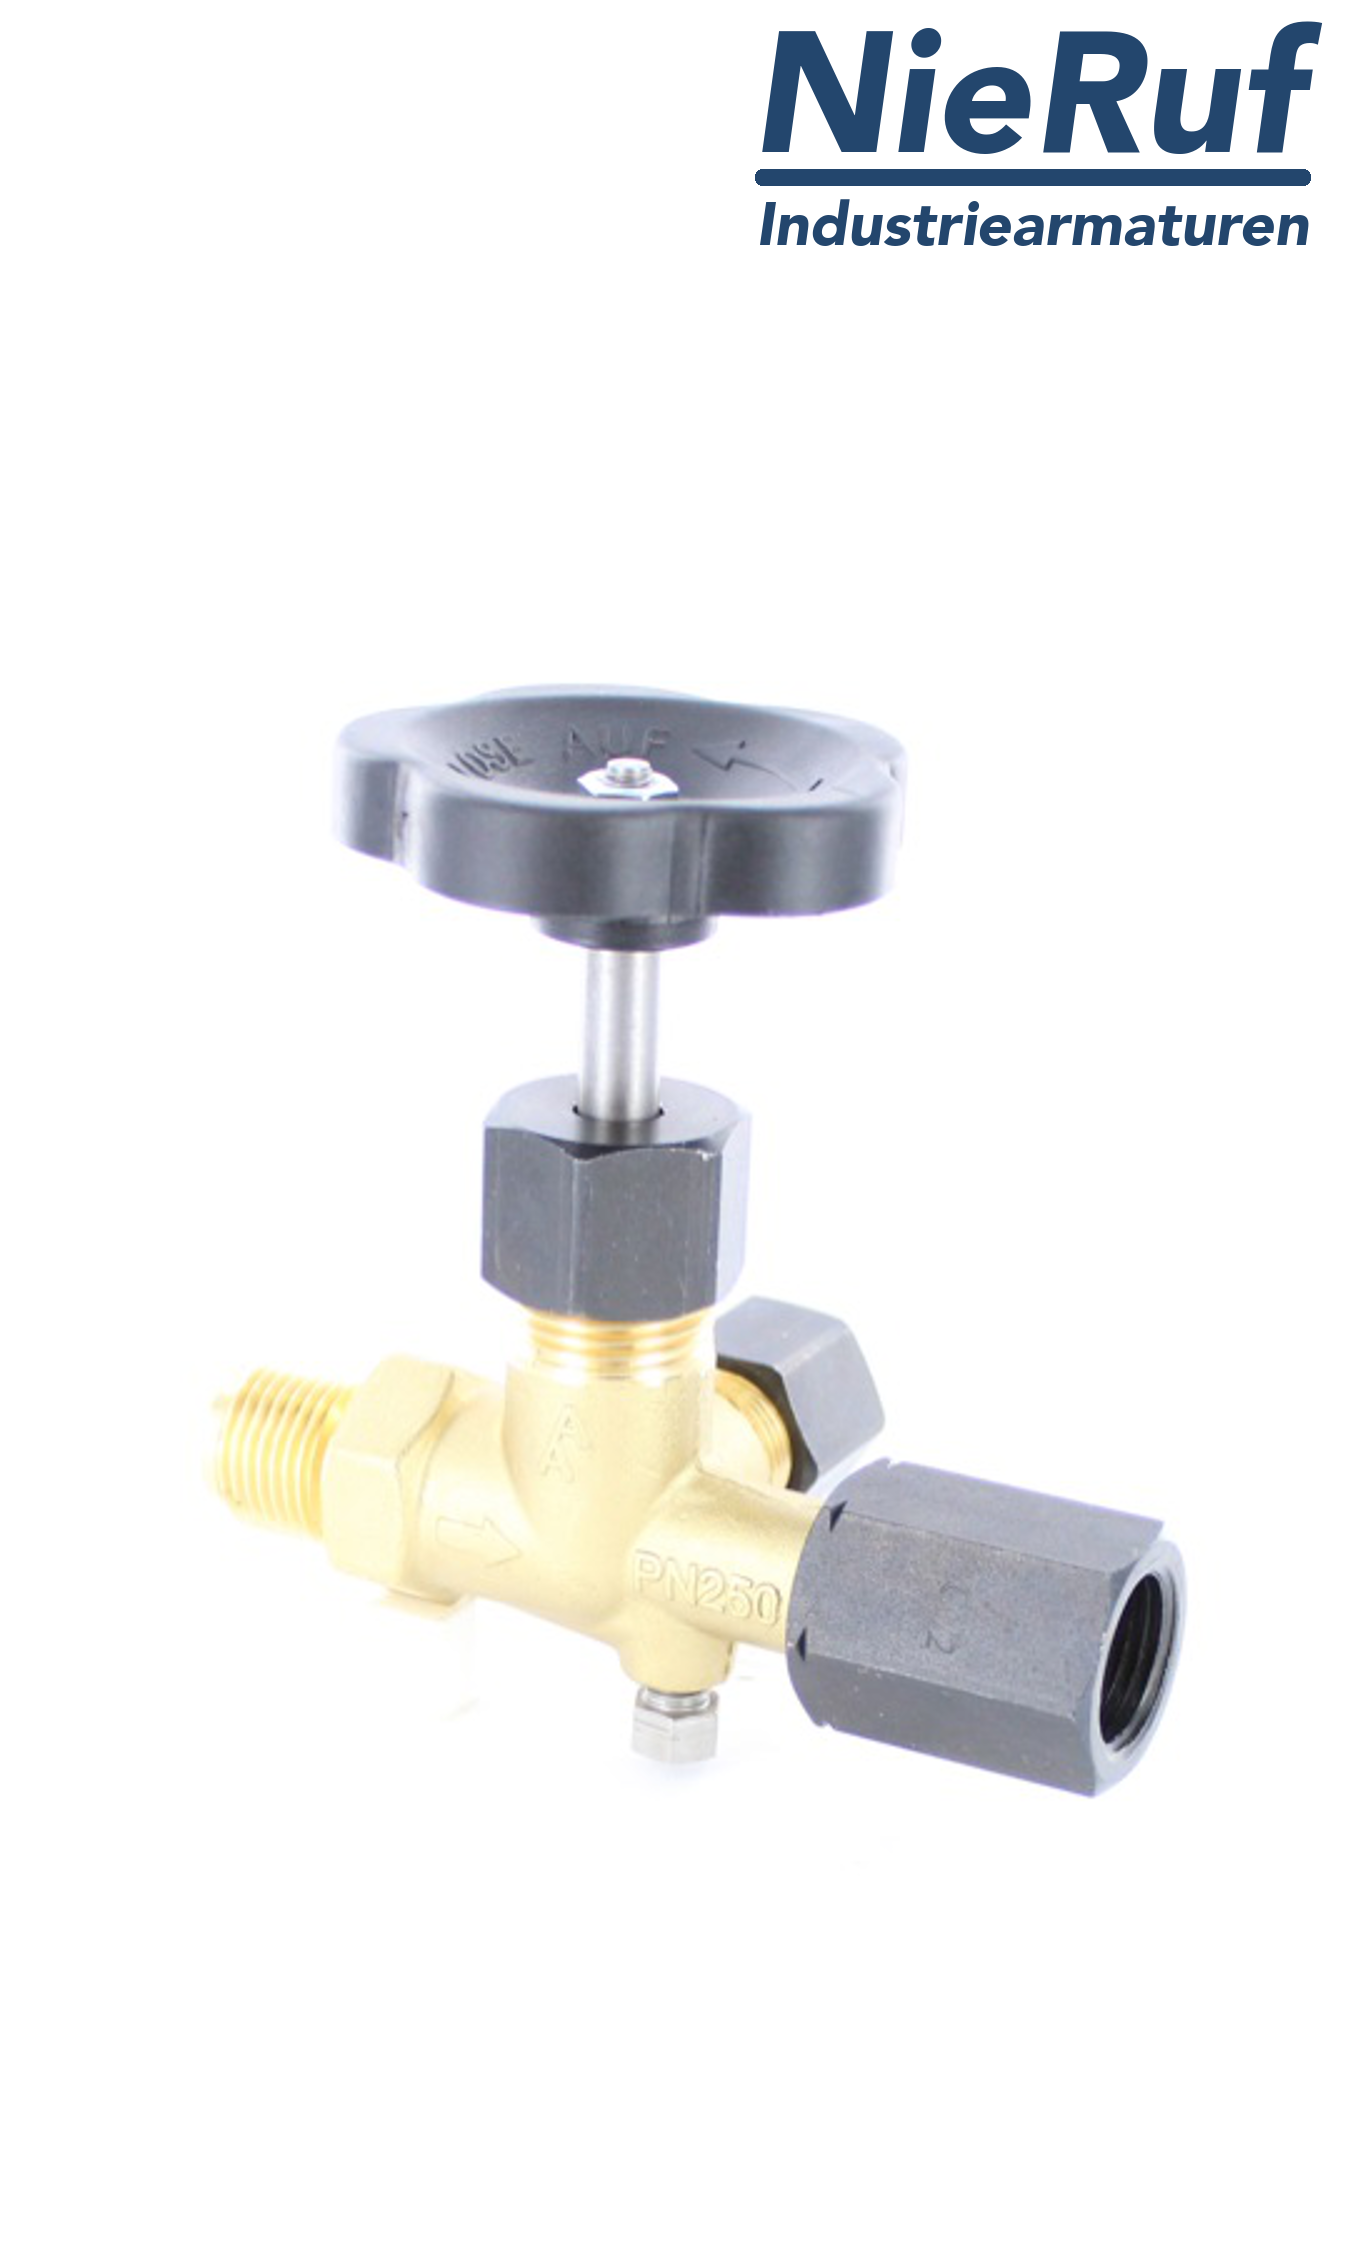 manometer gauge valves DIN 16271 with 1/2" connection